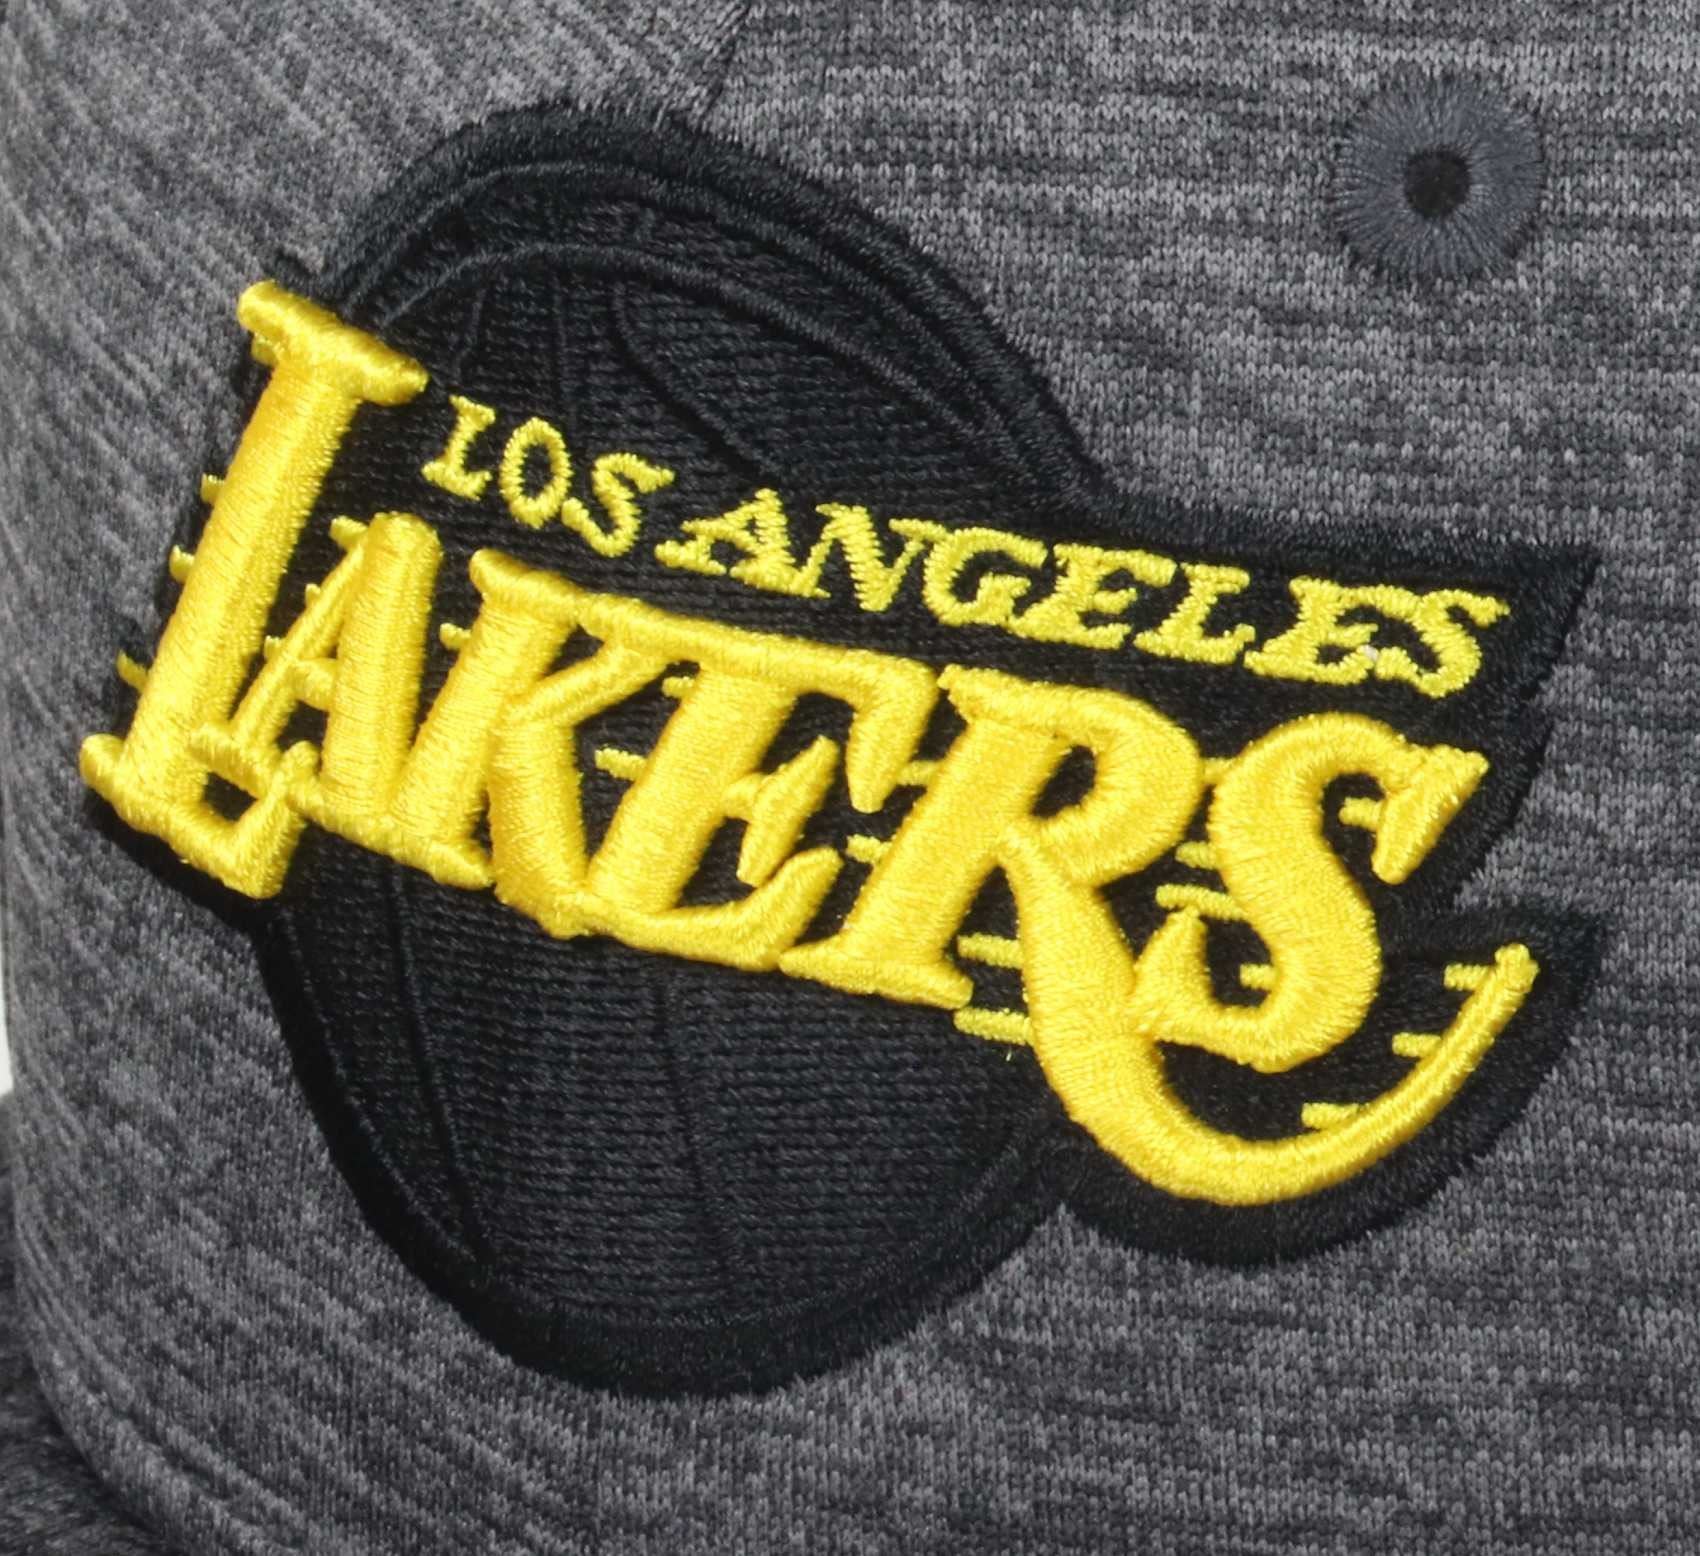 Los Angeles Lakers Shadow Tech 9Fifty Original Fit New Era